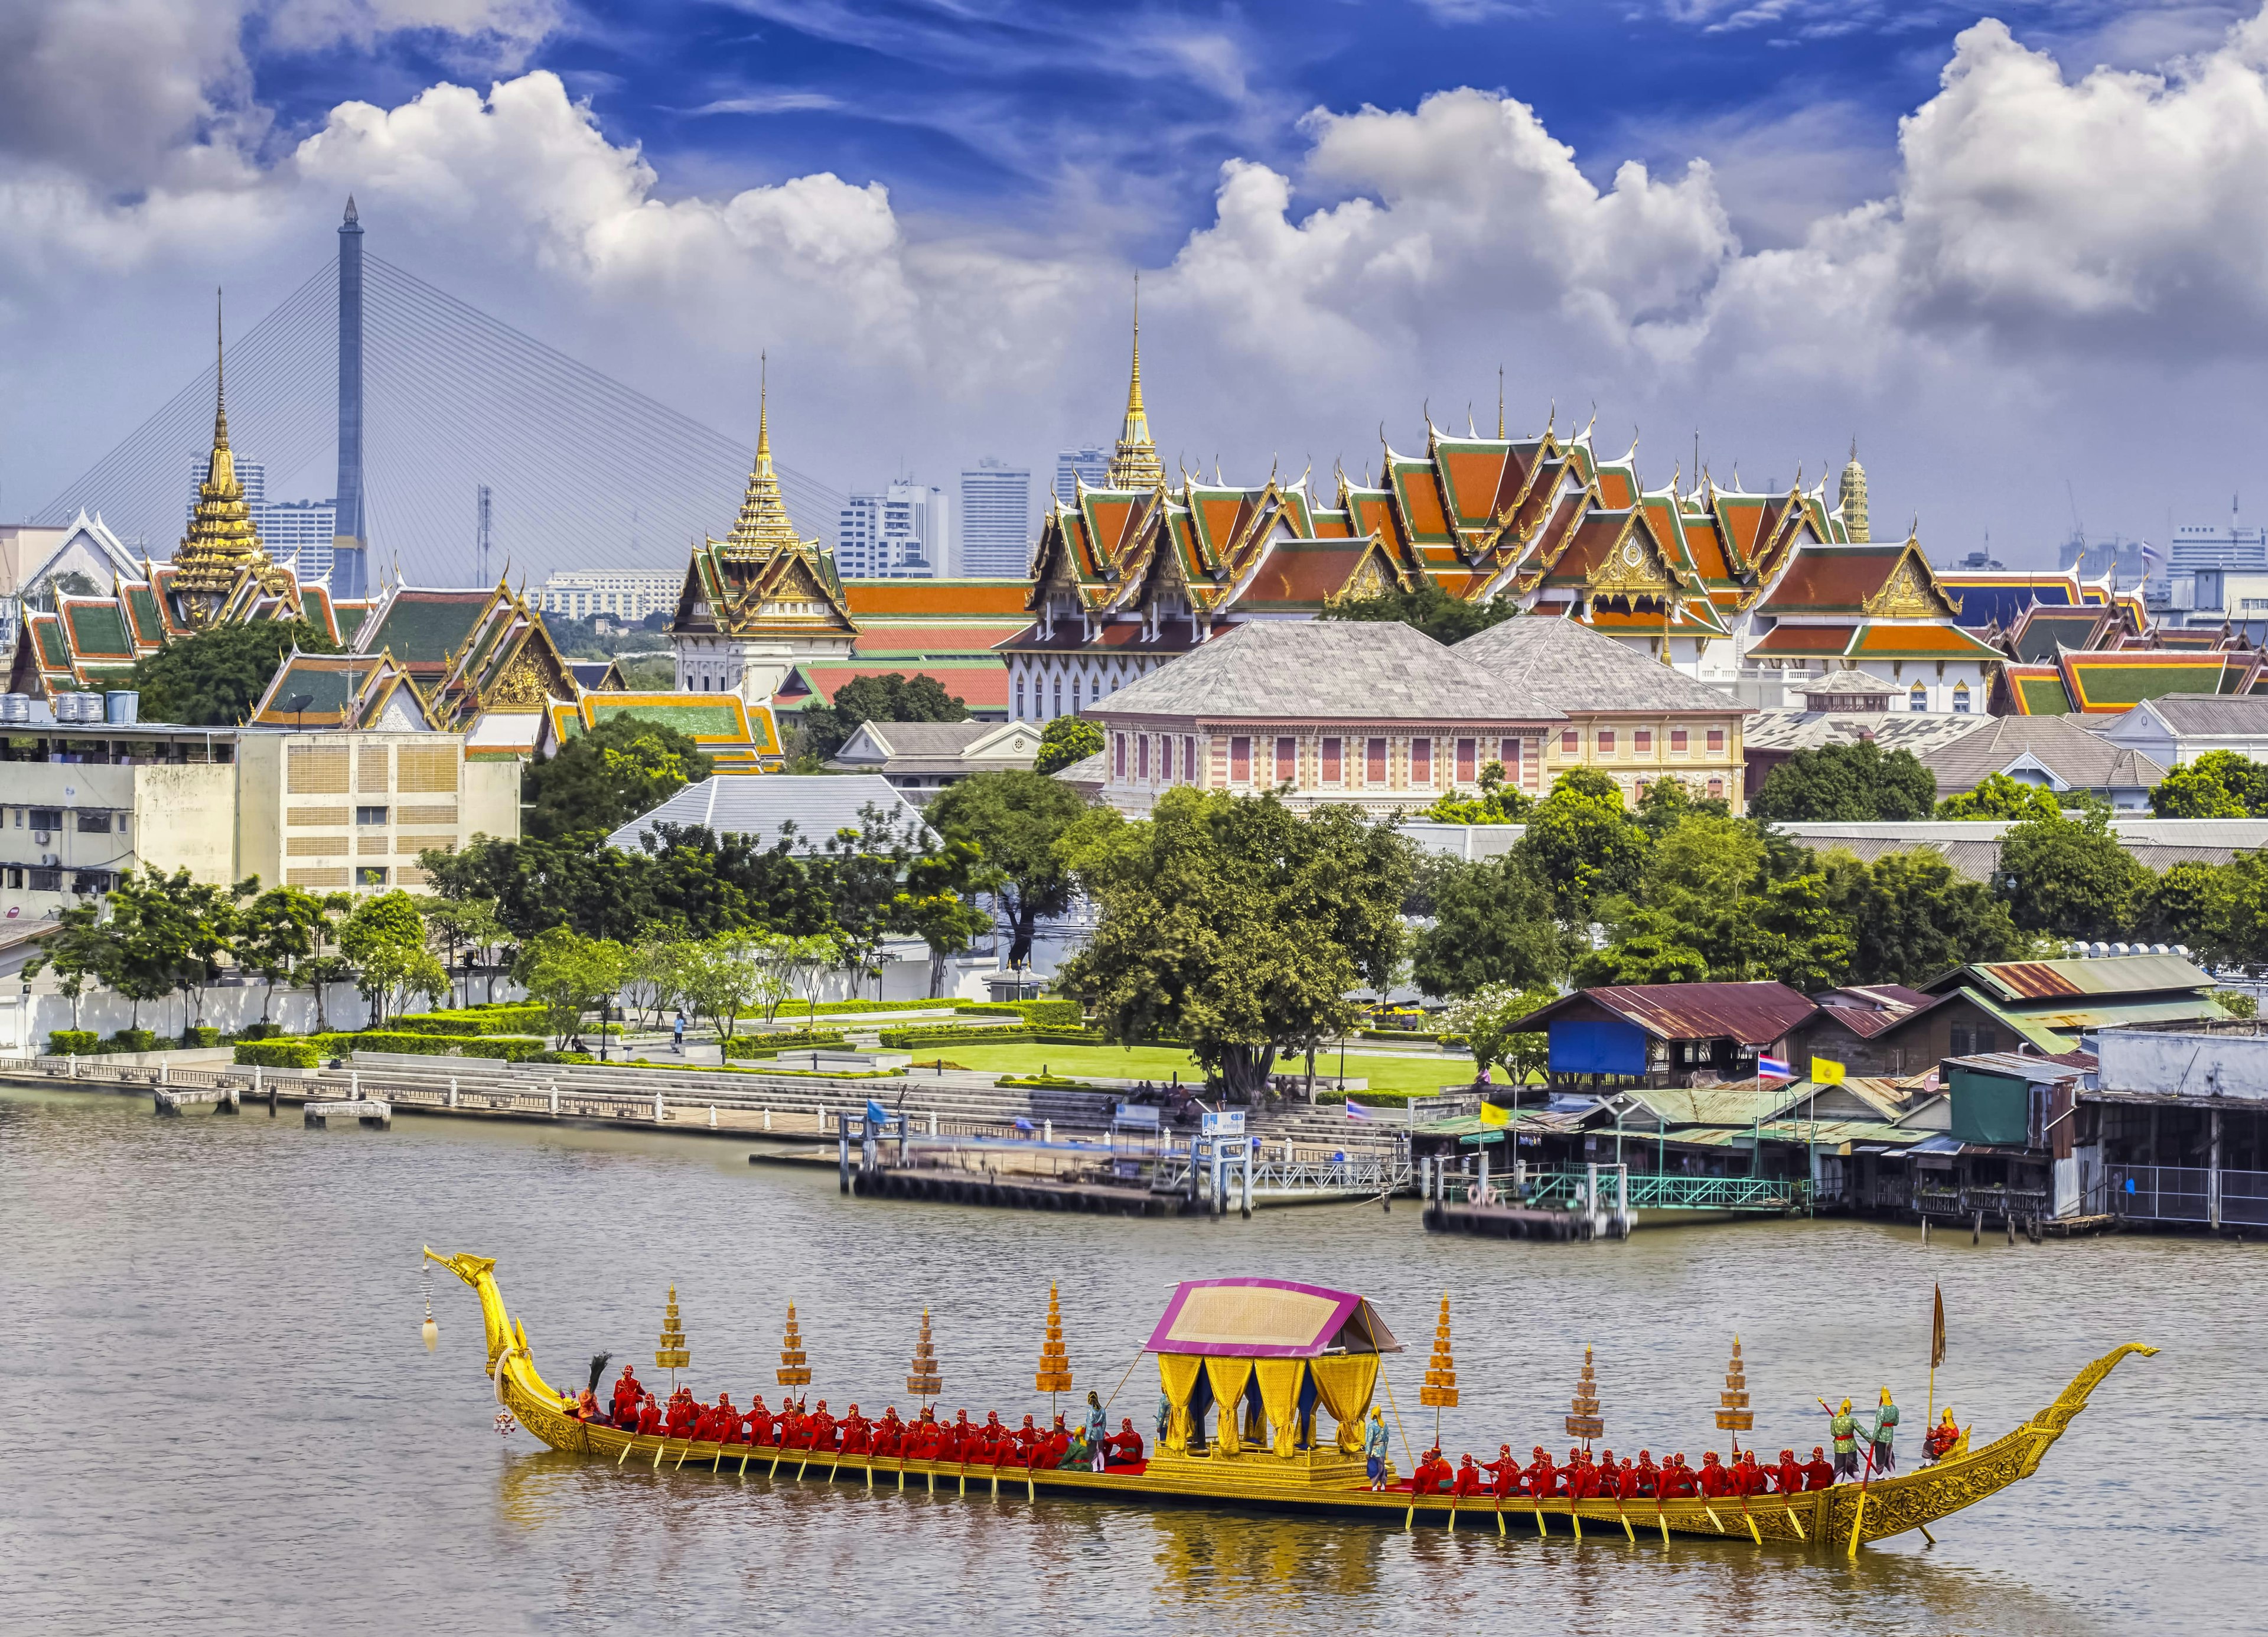 Bangkok’s Old Town and Temples: The forgotten heritage